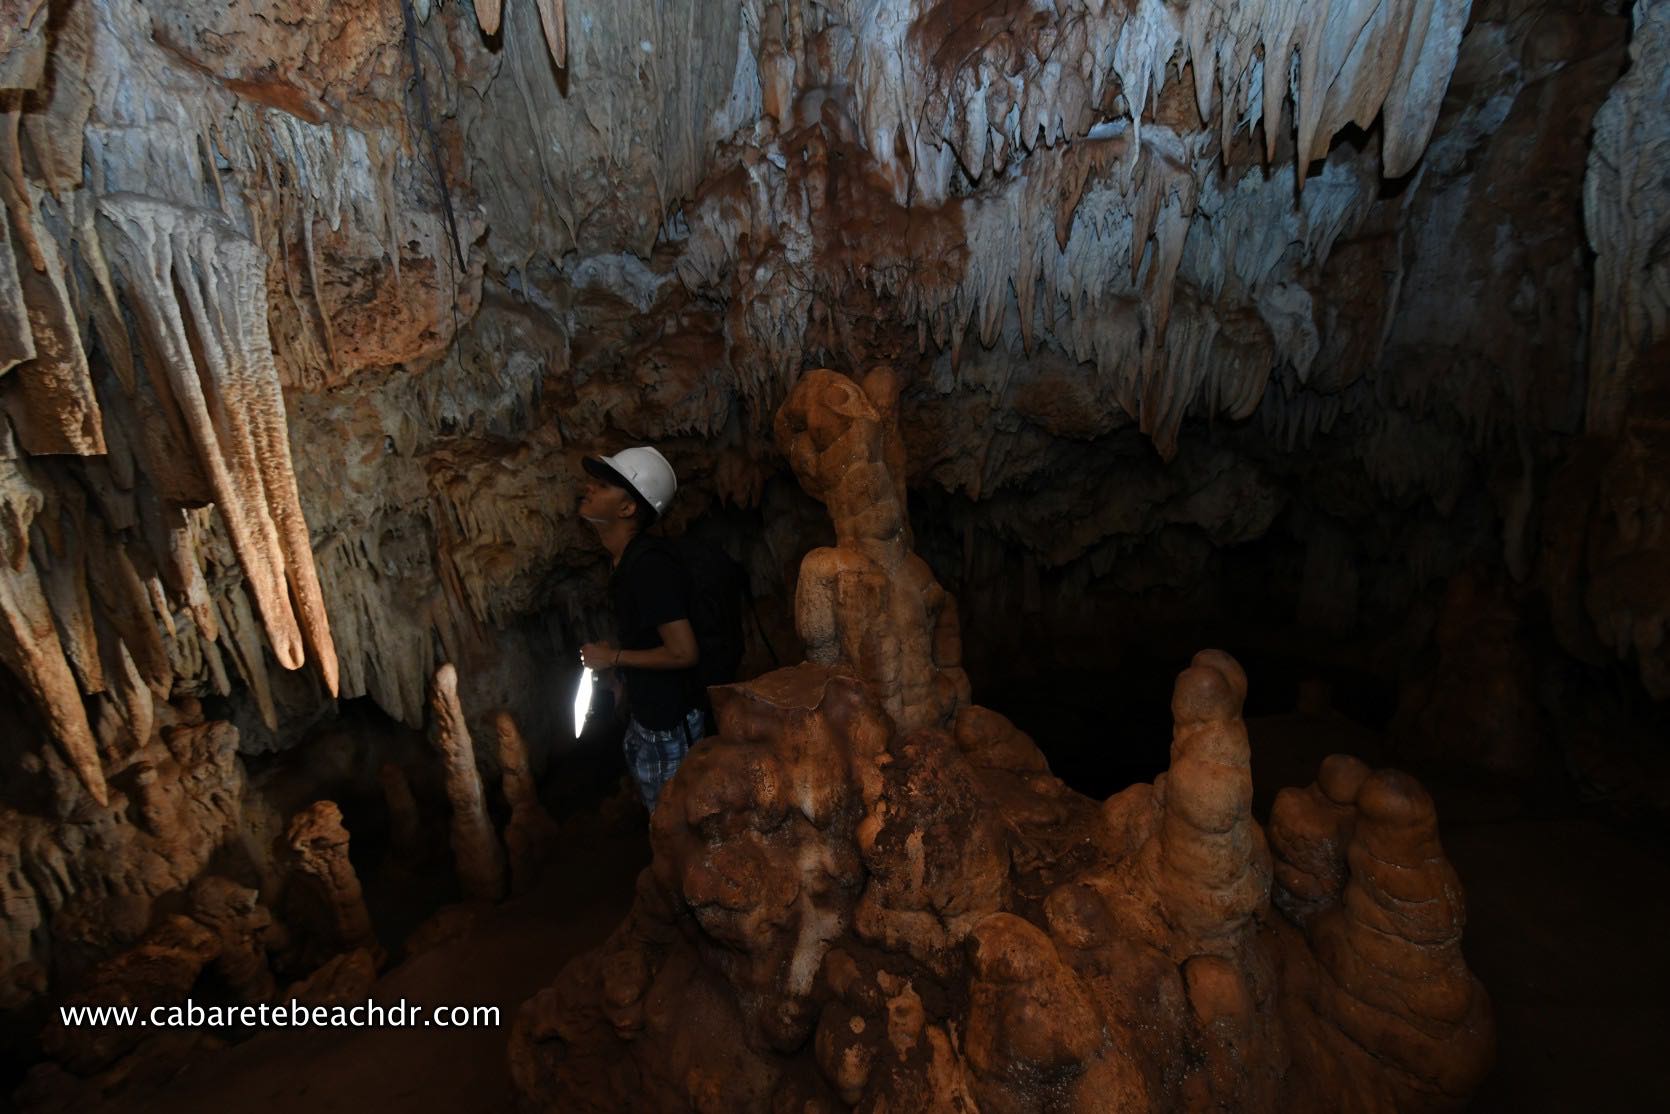 The interior of the cave shows stalagmites